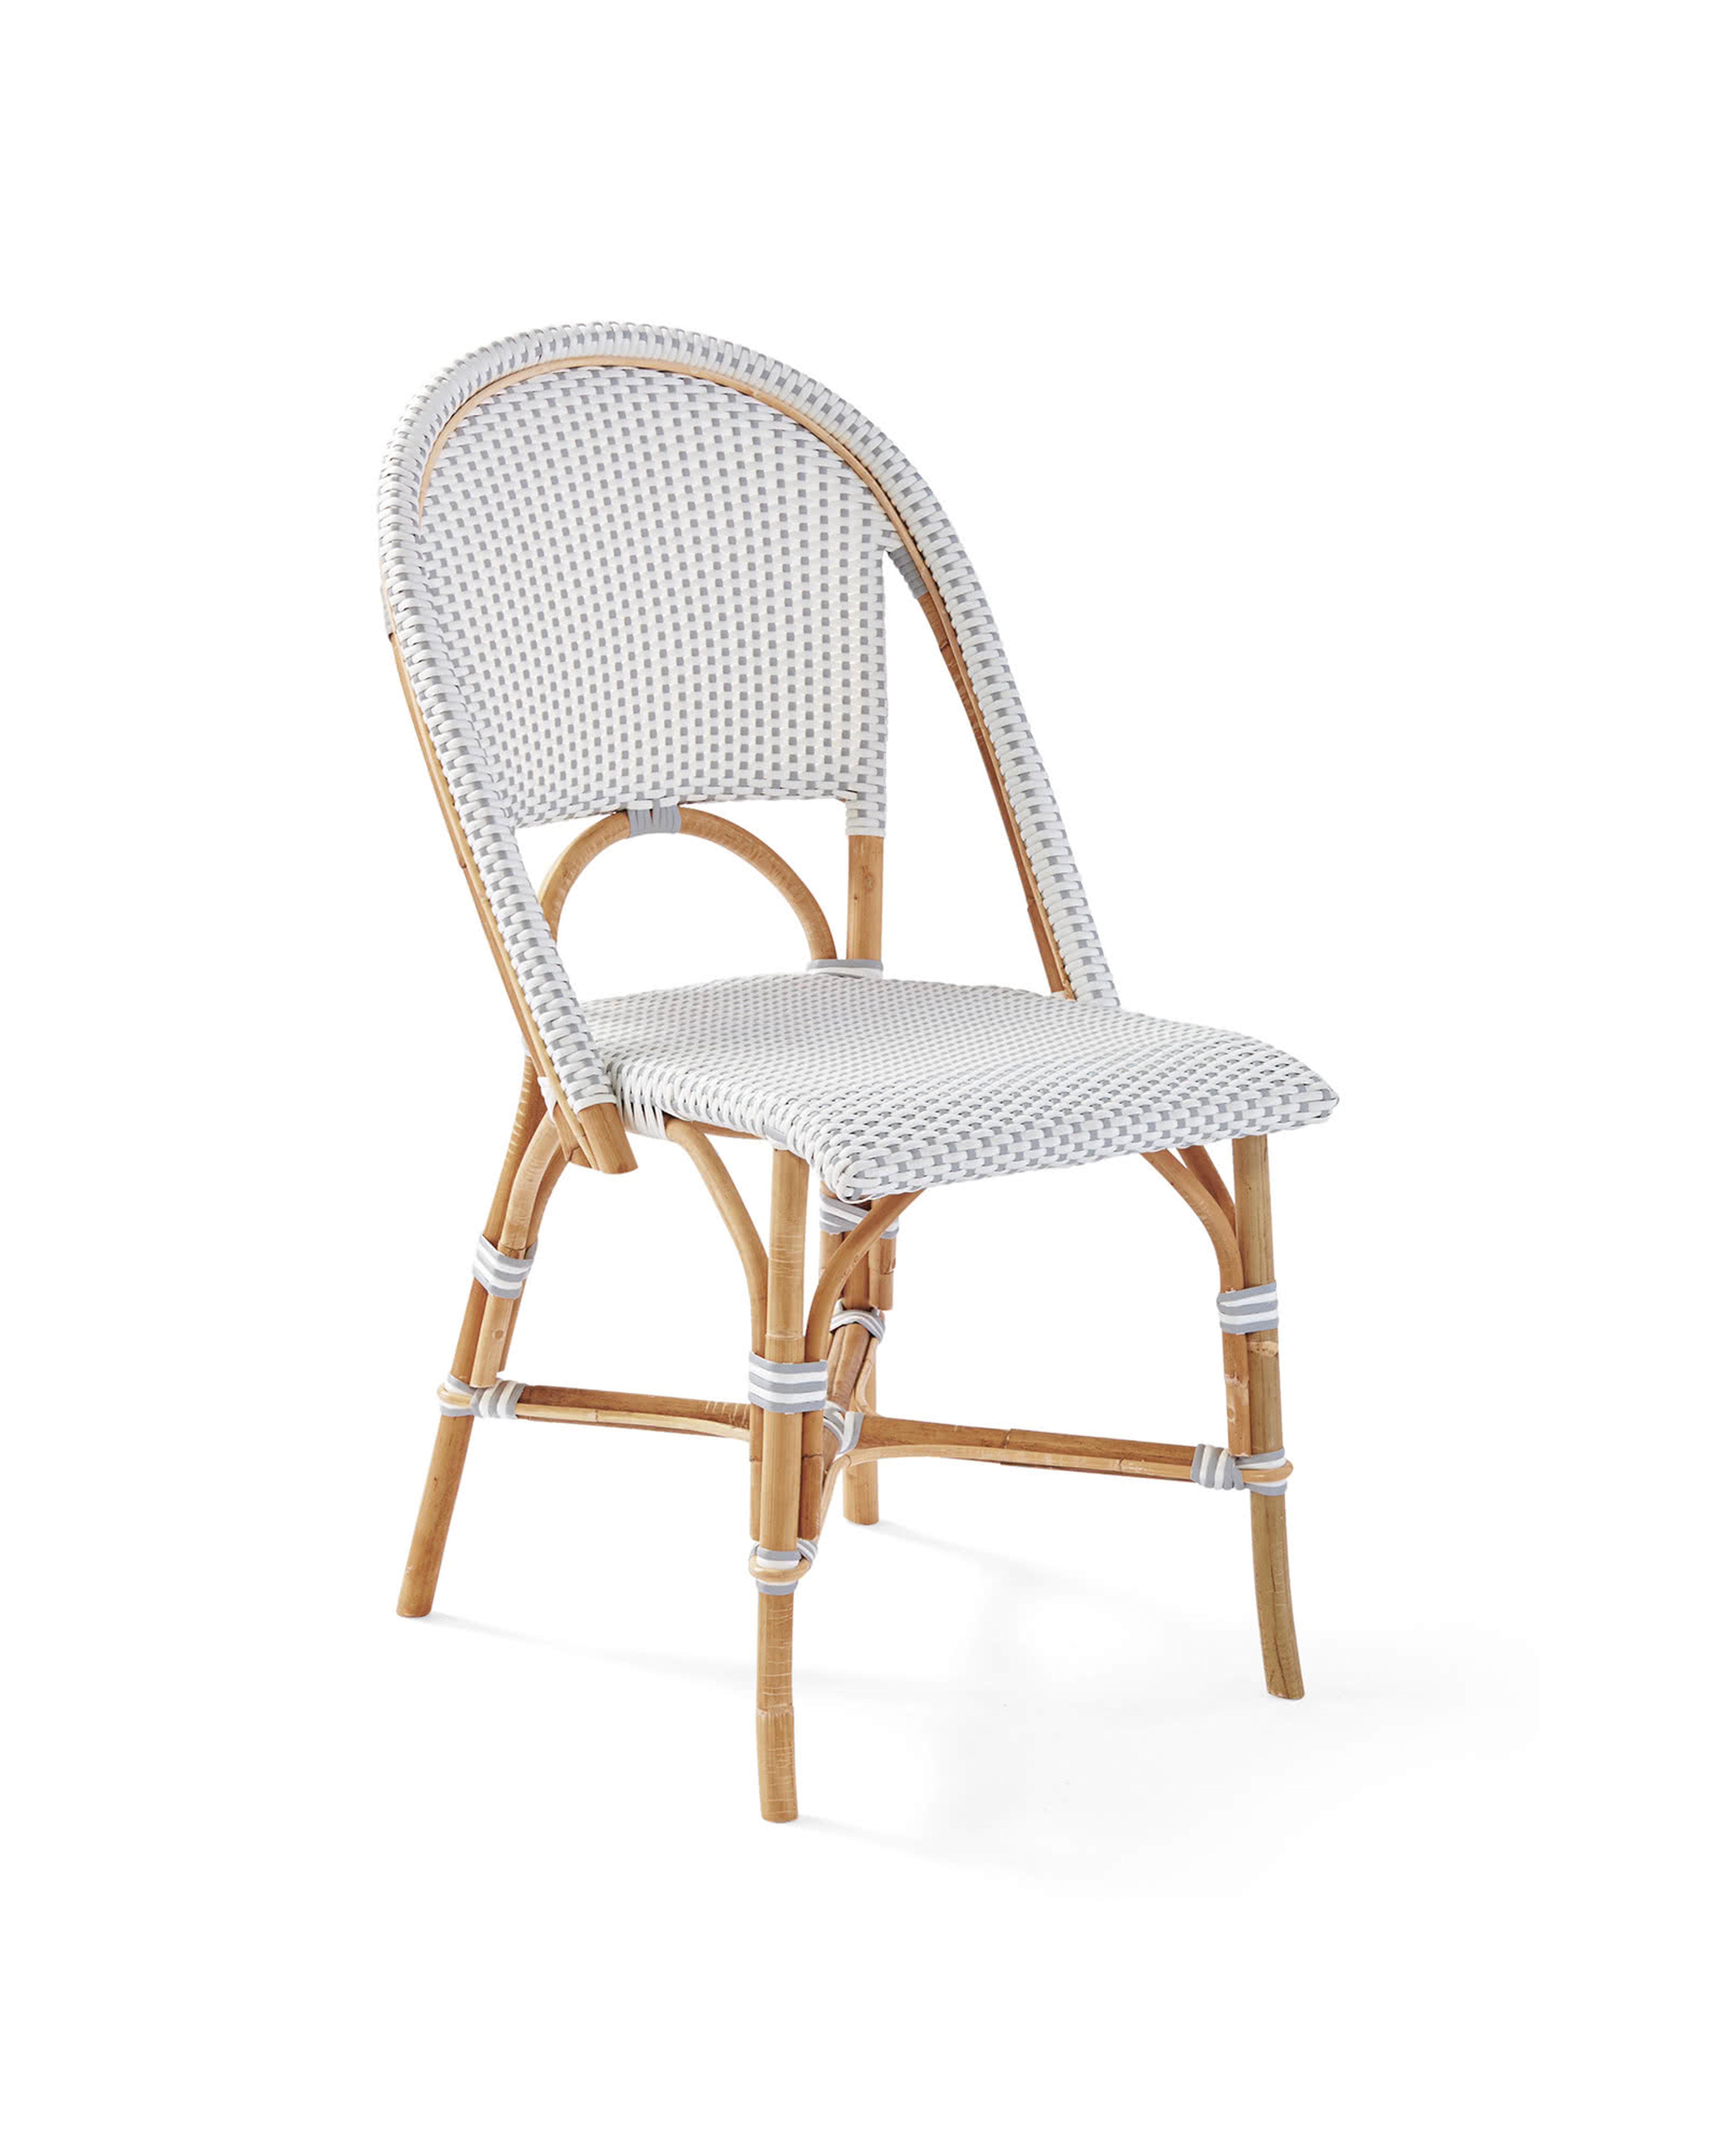 Sunwashed Riviera Rattan Dining Chair - Mist - Serena and Lily